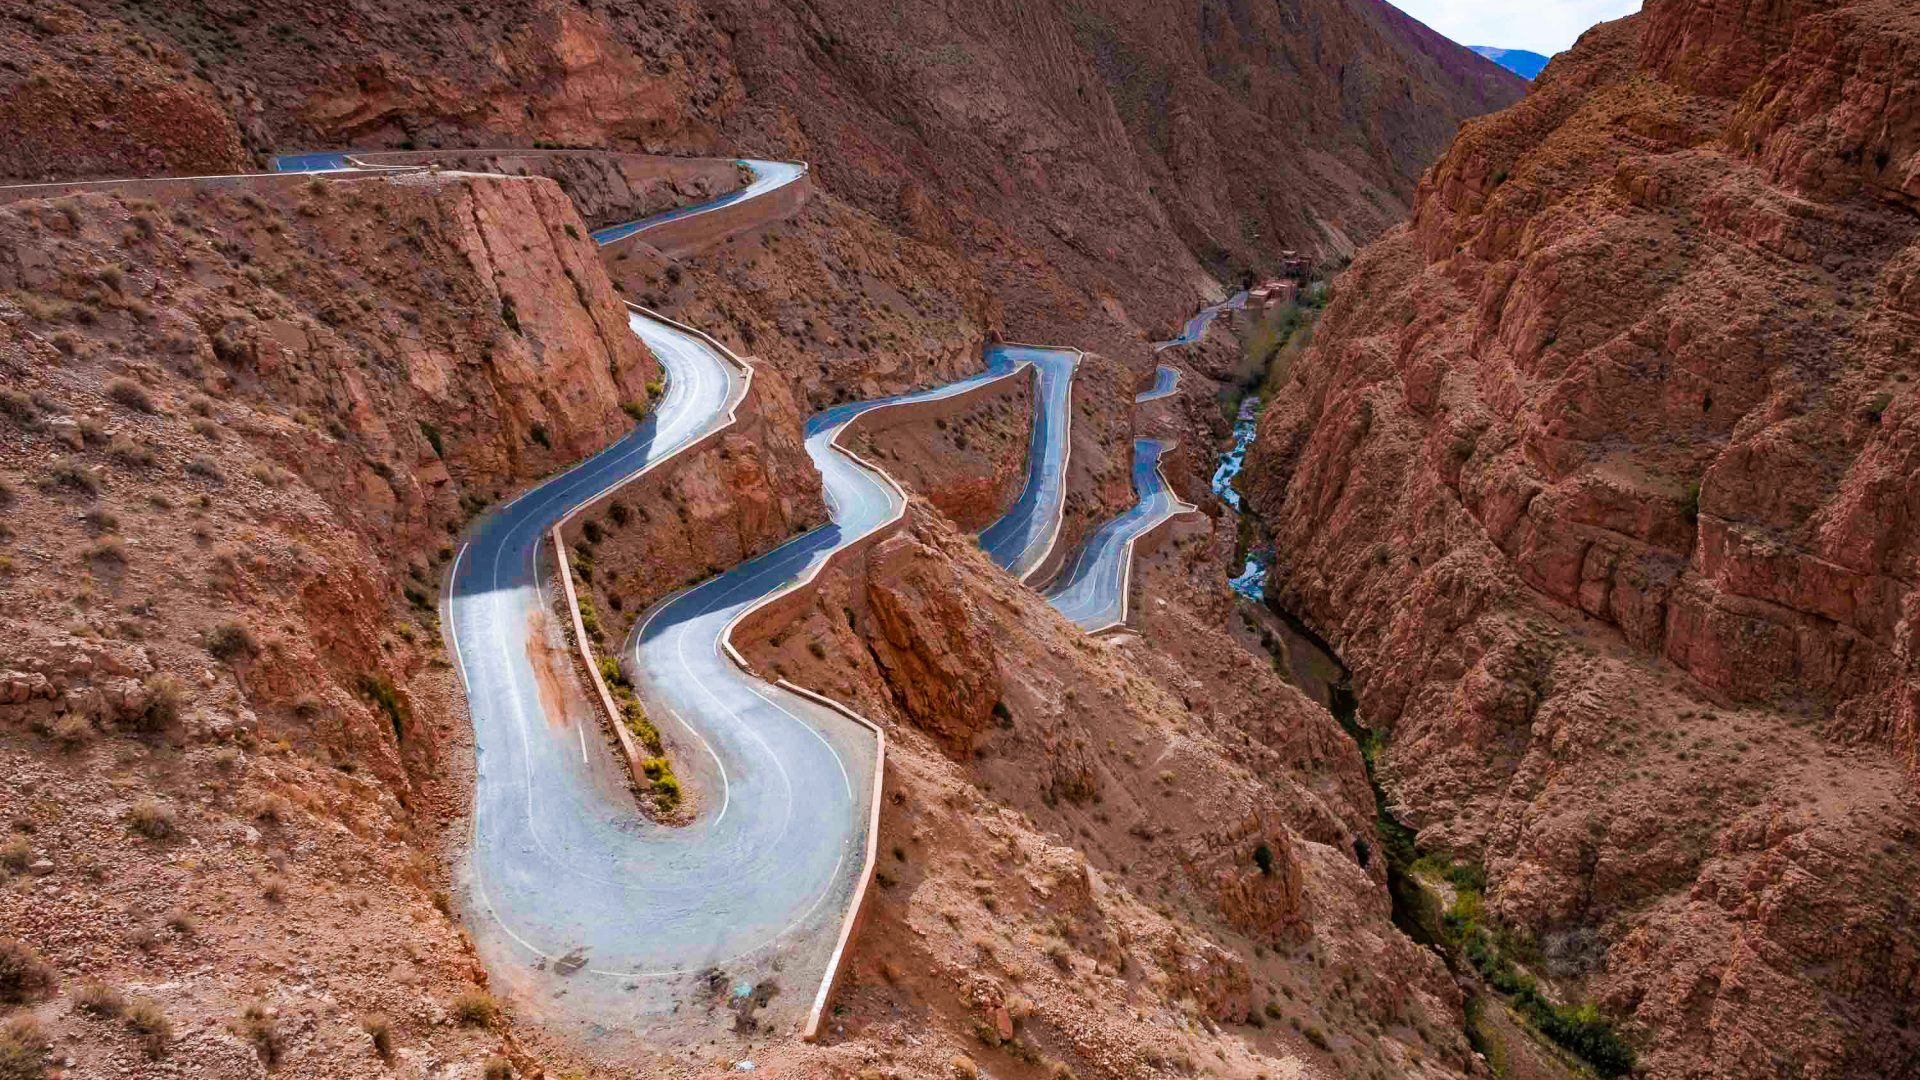 A windy road through bare mountains.